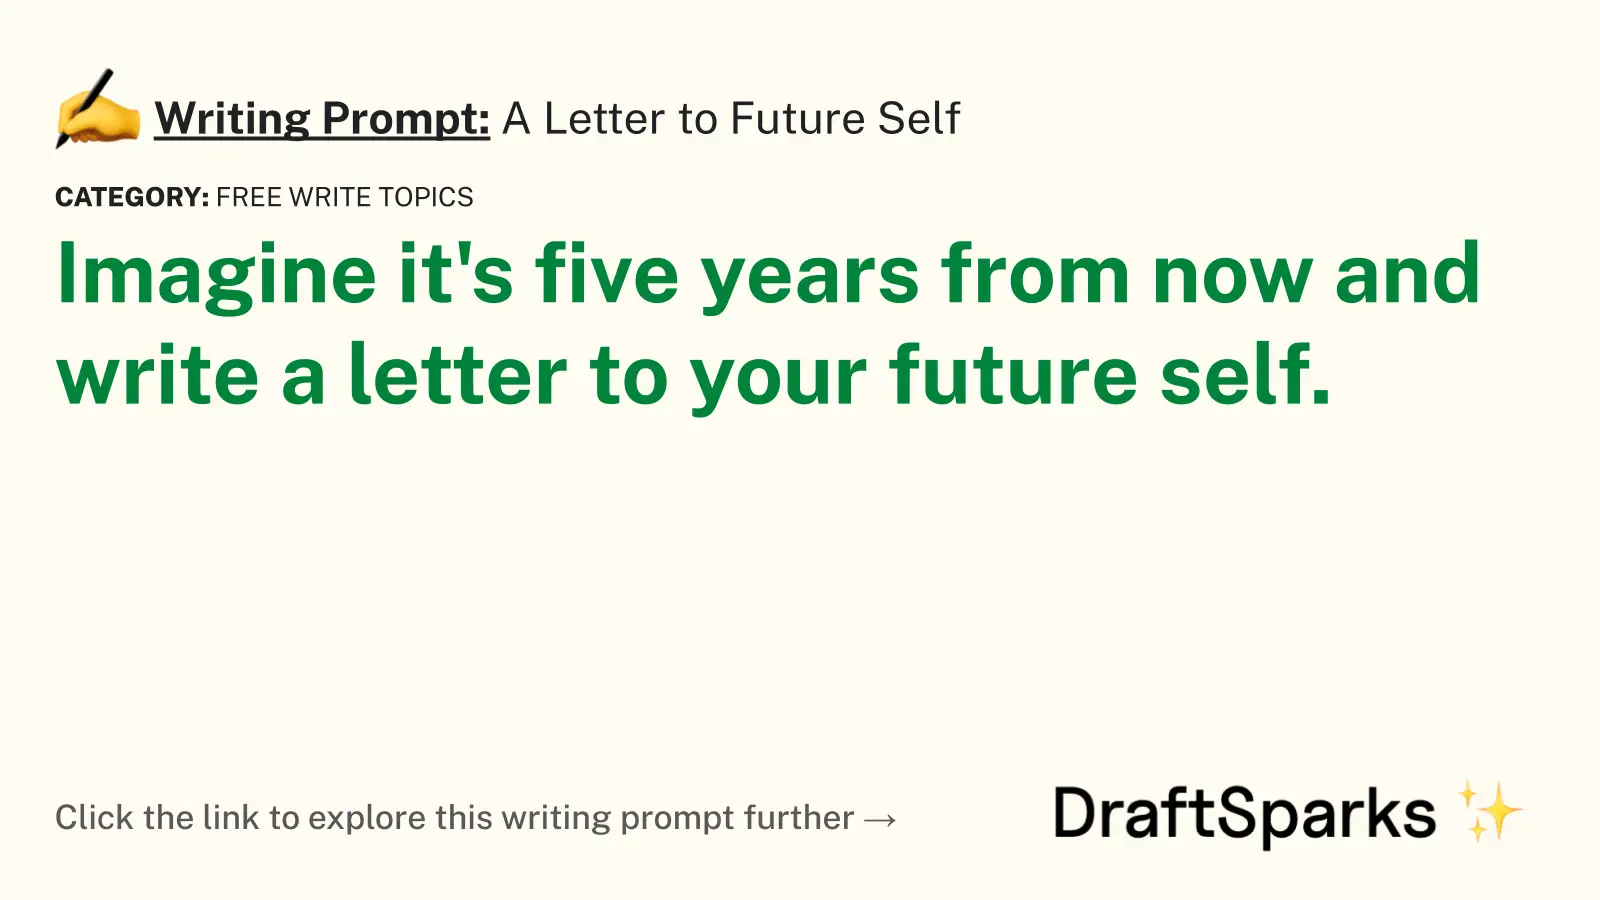 A Letter to Future Self